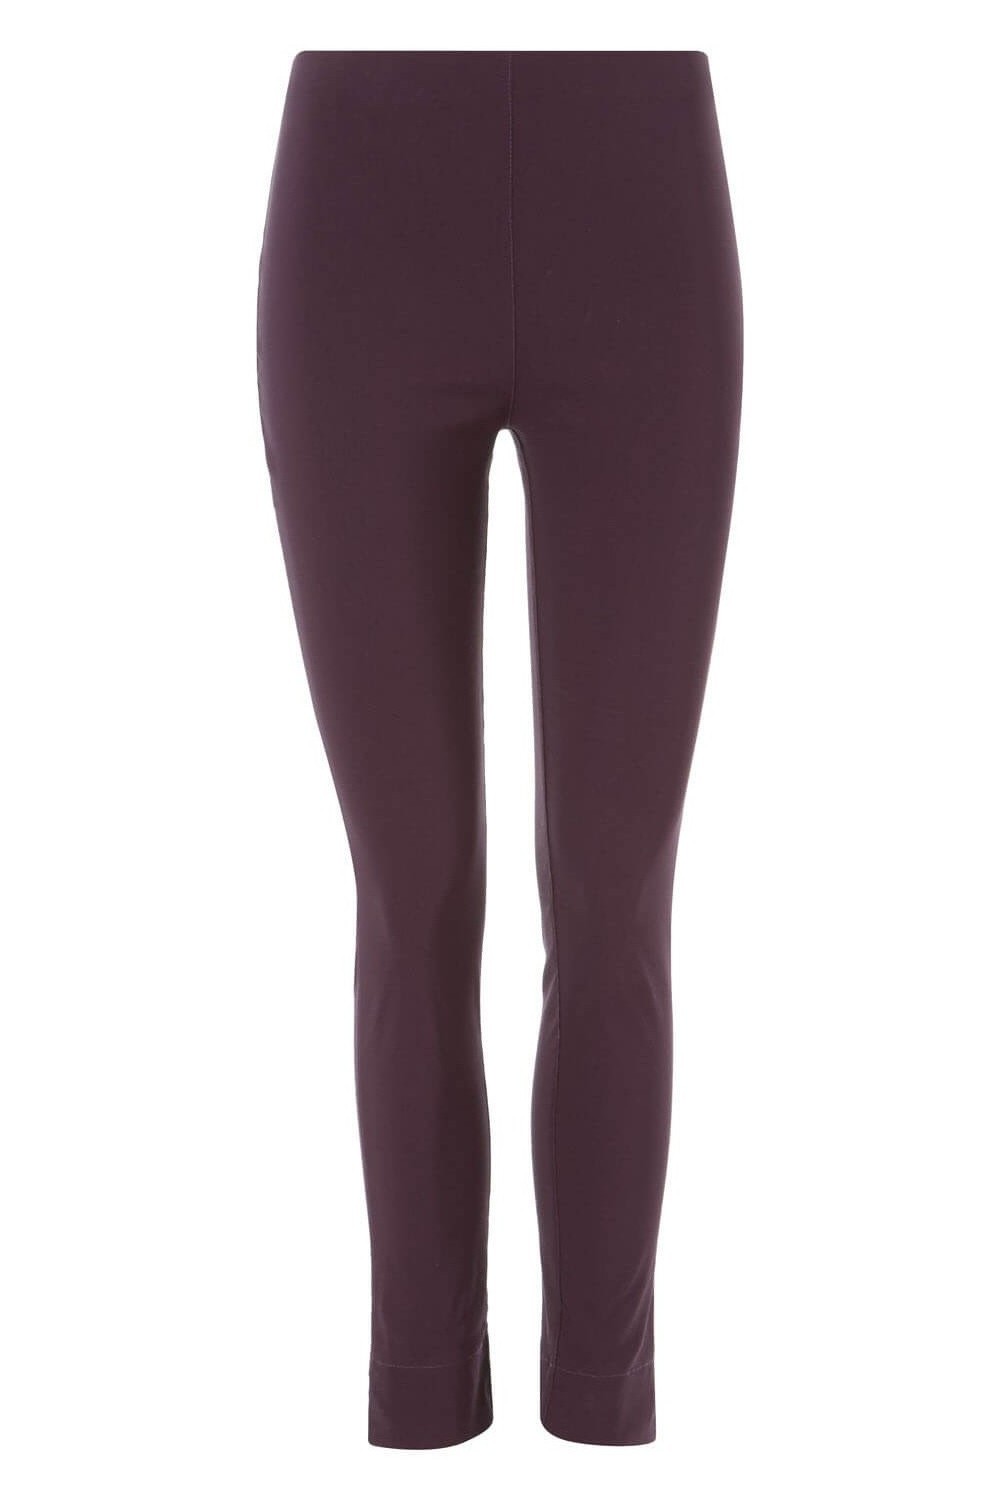 Aubergine Full Length Stretch Trousers, Image 2 of 6